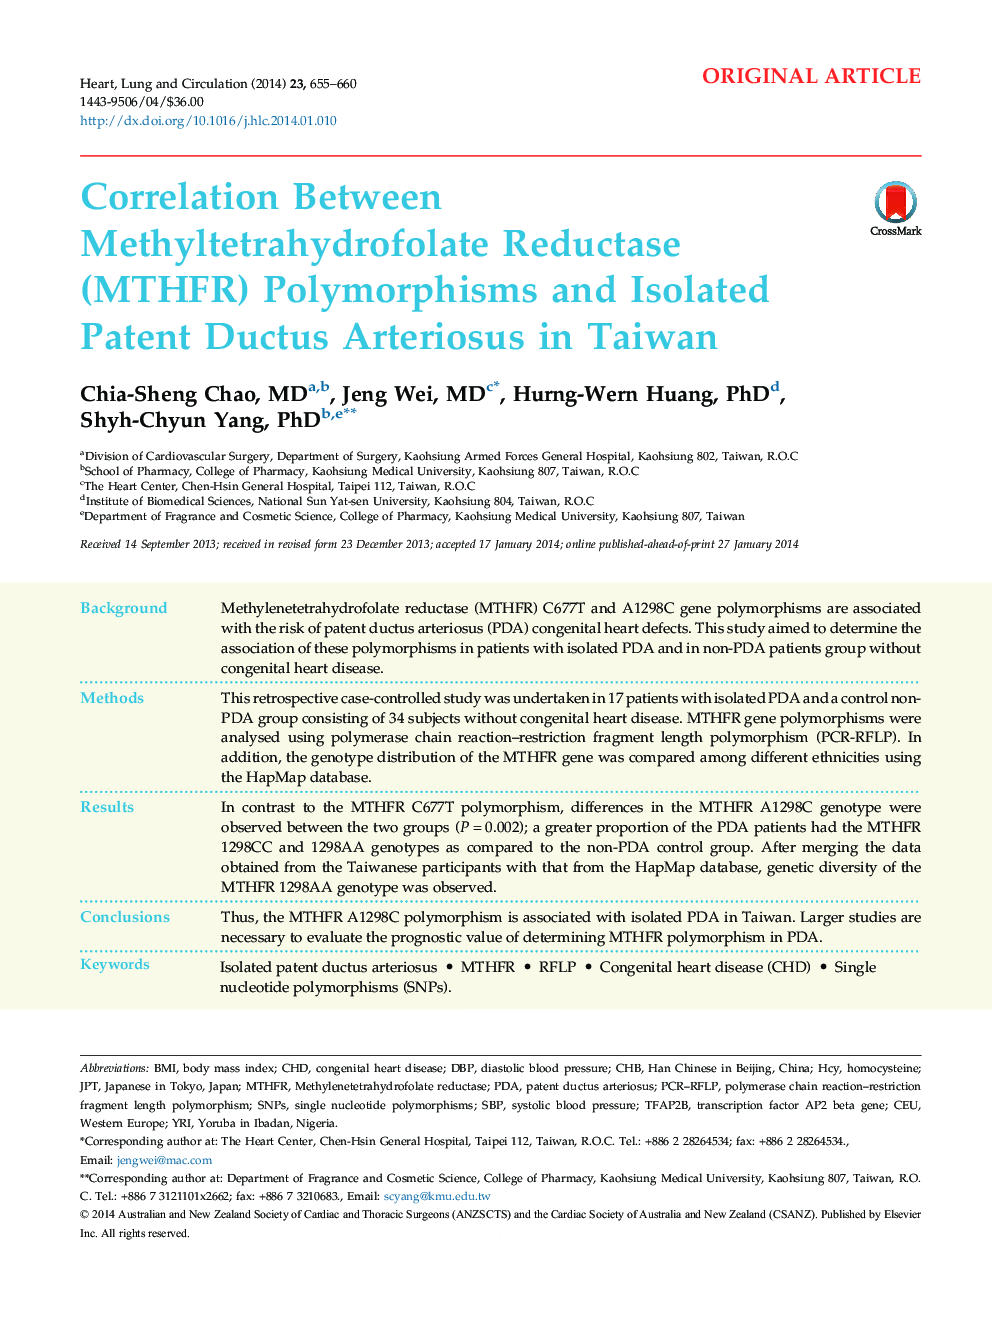 Correlation Between Methyltetrahydrofolate Reductase (MTHFR) Polymorphisms and Isolated Patent Ductus Arteriosus in Taiwan